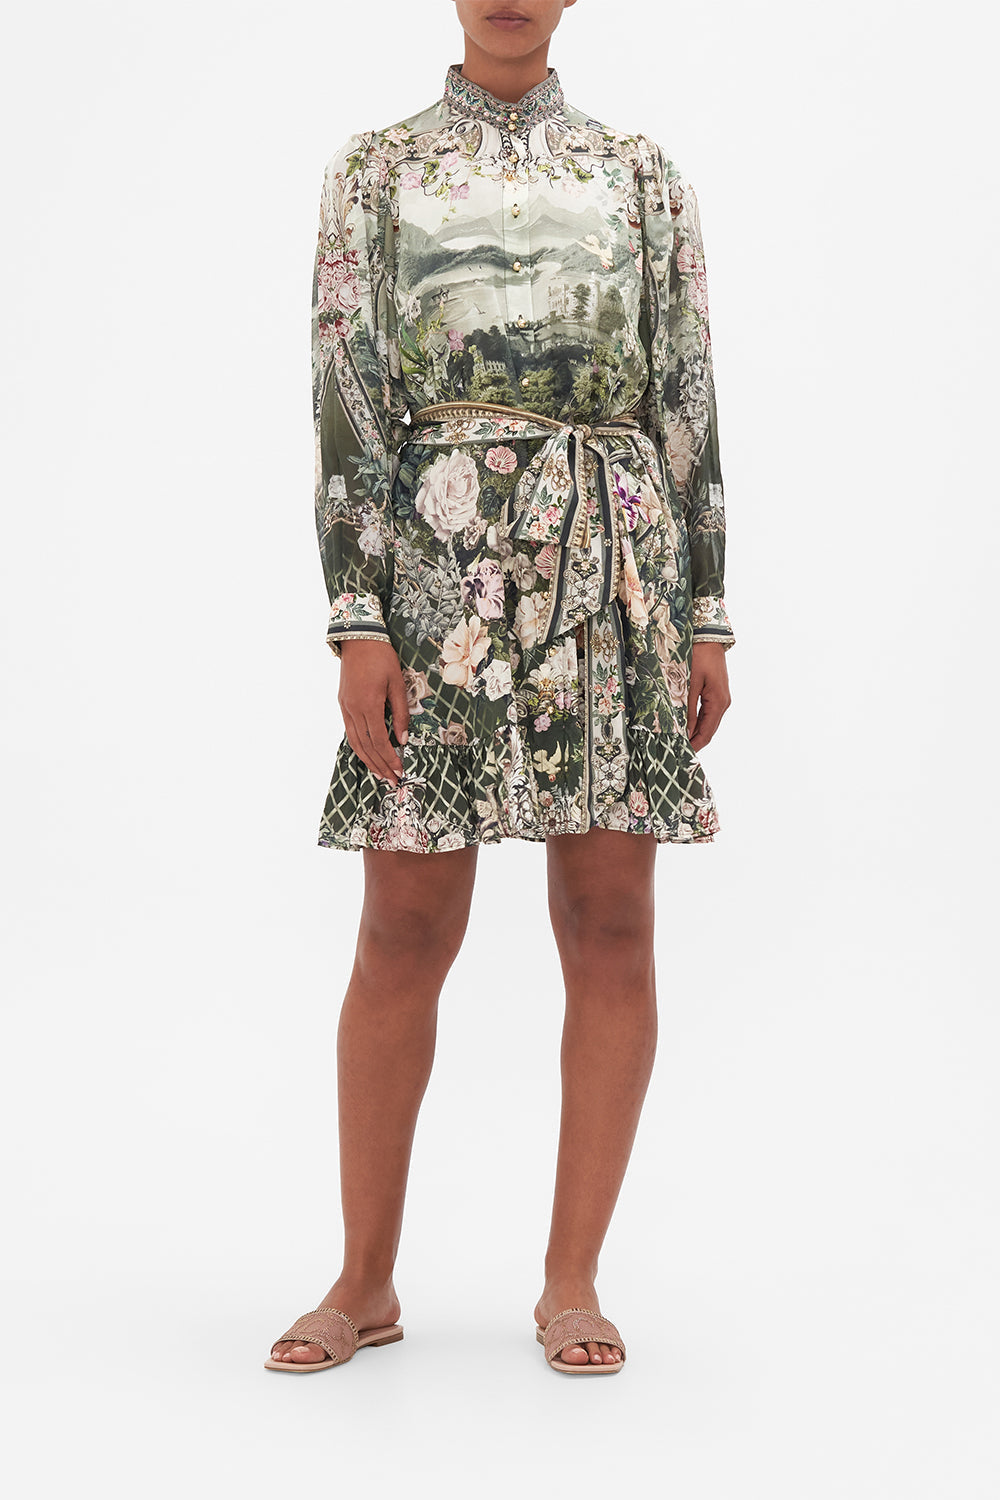 Front view of model wearing Camilla floral silk shirt dress Garden of Good Fortune print